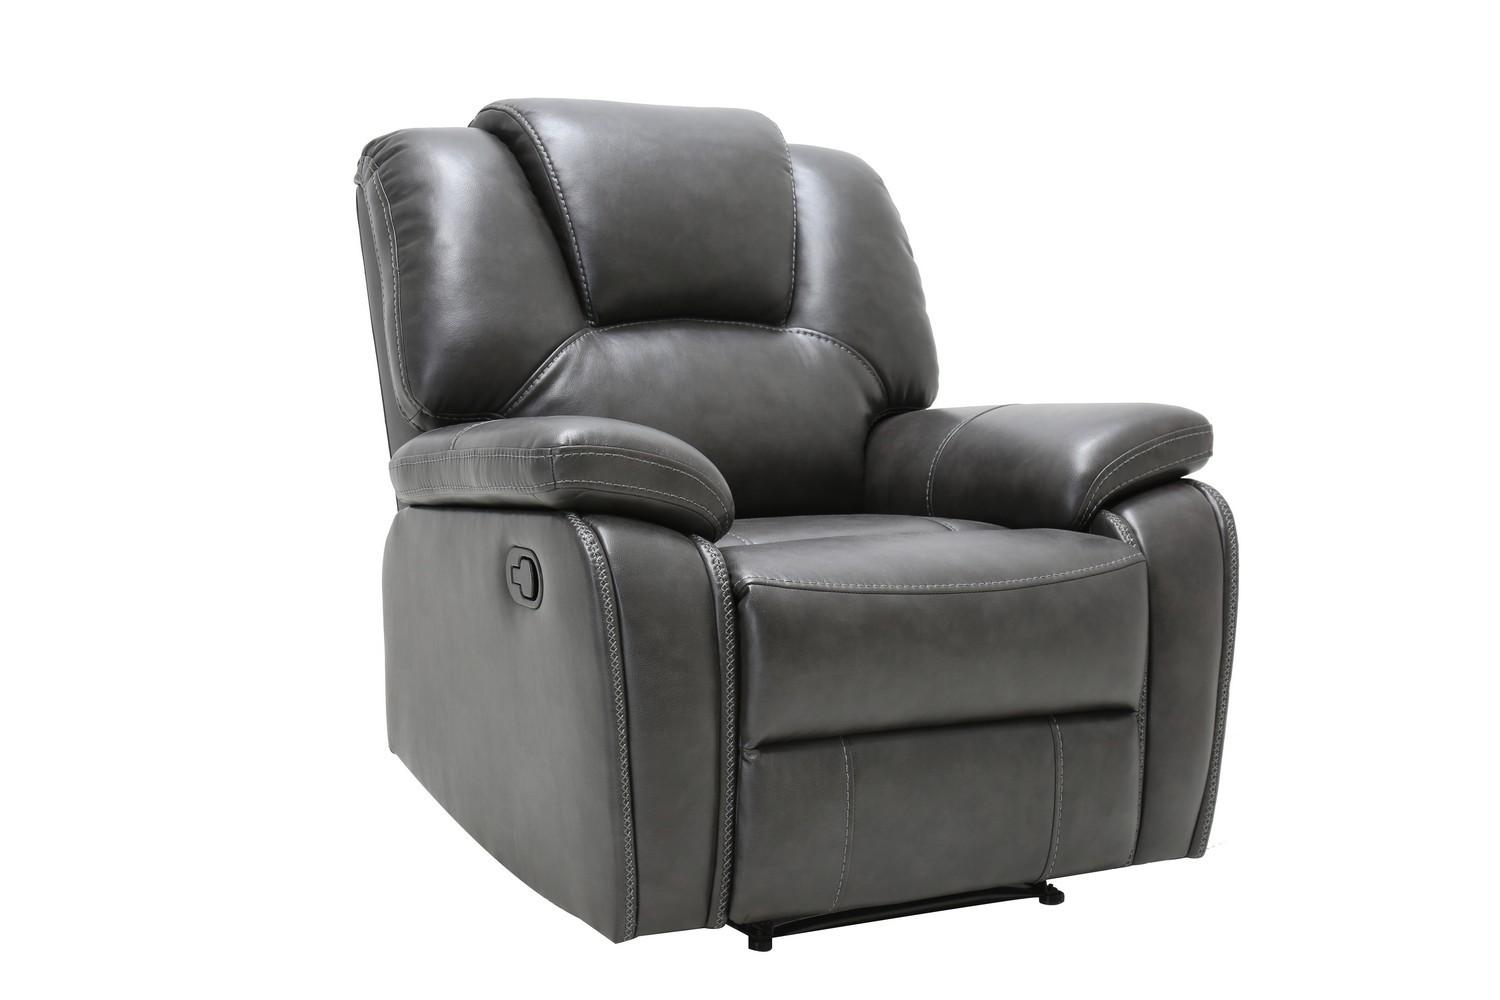 Contemporary Reclining Chair 7993-GRAY 7993-GRAY-CH in Gray Leather Air Material